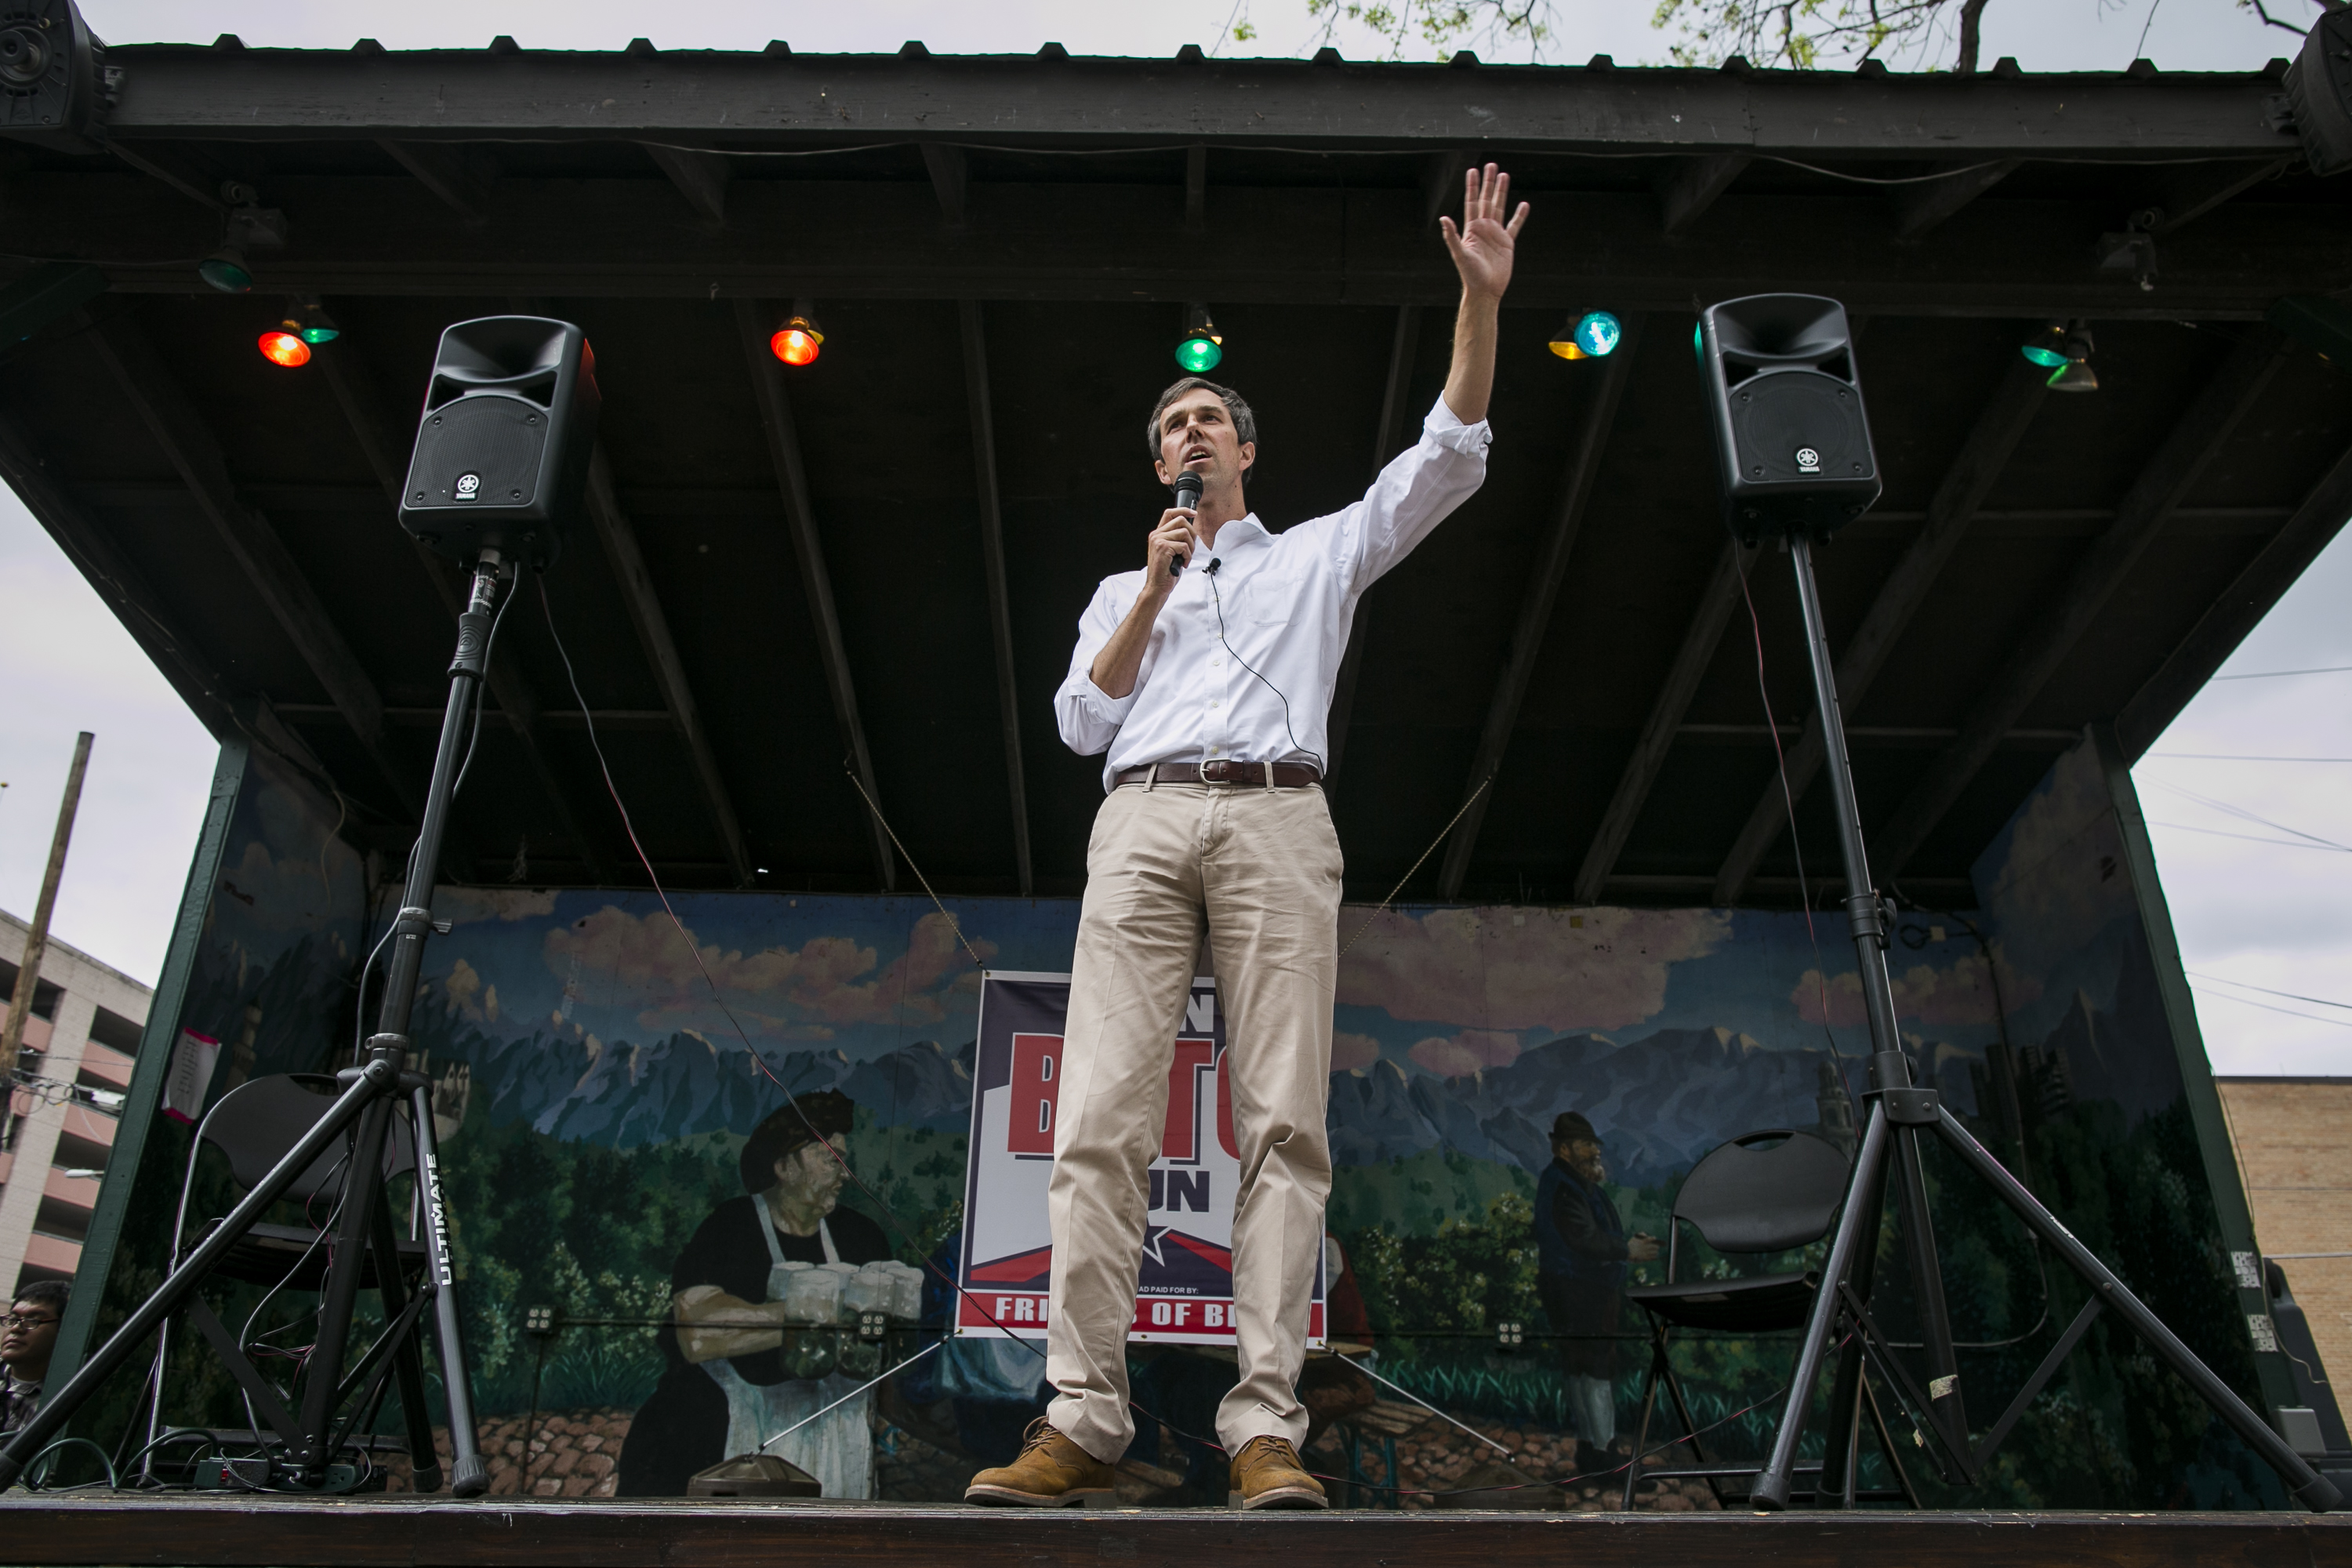 AUSTIN, TX - APRIL 1: Rep. Beto O'Rourke (D-TX) speaks to a group of supporters at Scholz Garten on April 1, 2017 in Austin, Texas. O'Rourke announced his plan to run for Ted Cruz's Senate seat on Friday and launched his campaign with a four-city tour of Texas. (Photo by Drew Anthony Smith/Getty Images)